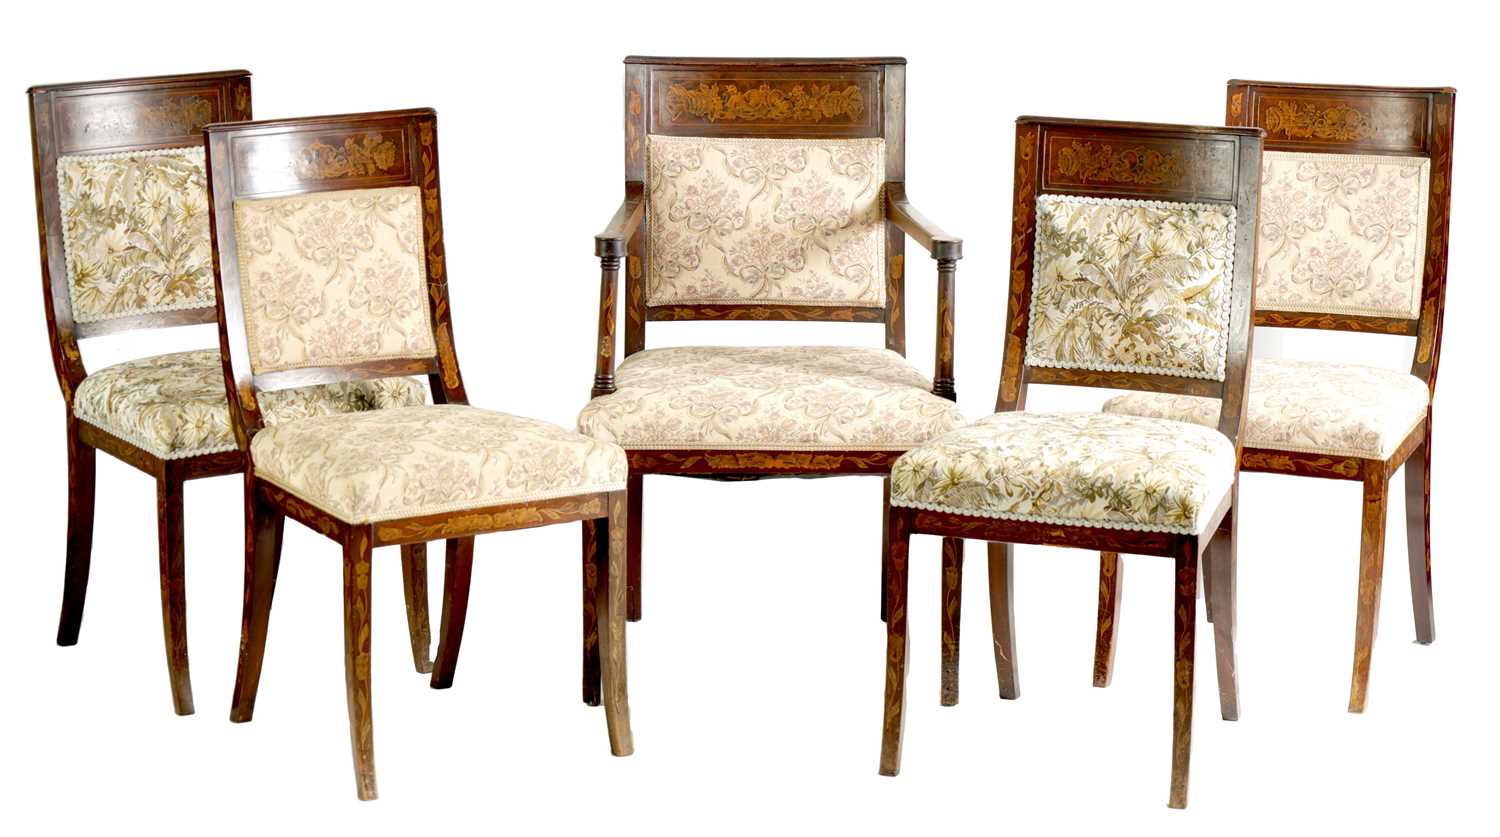 A SET OF FIVE GEORGE III DUTCH MARQUETRY INLAID MAHOGANY DINING CHAIRS